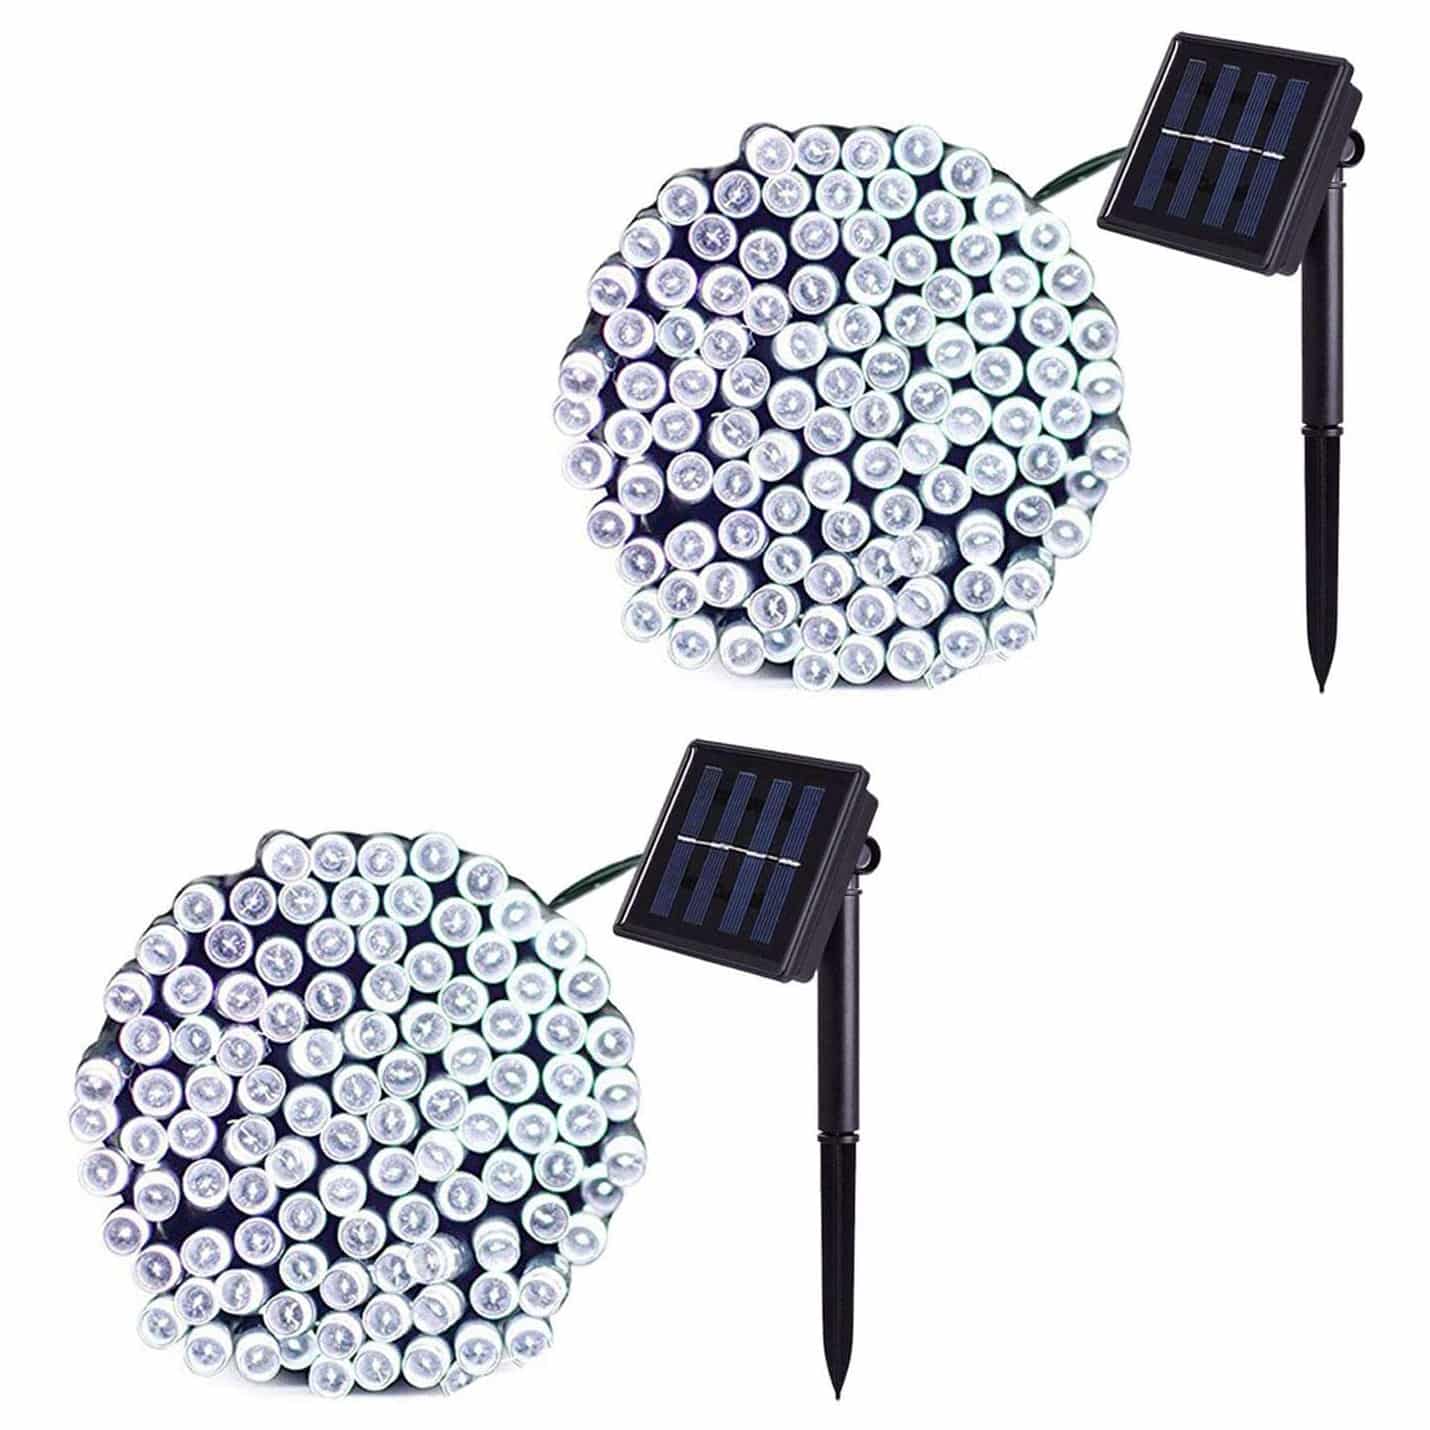 Top 10 Best Solar Christmas Lights in 2021 Reviews | Buyer's Guide